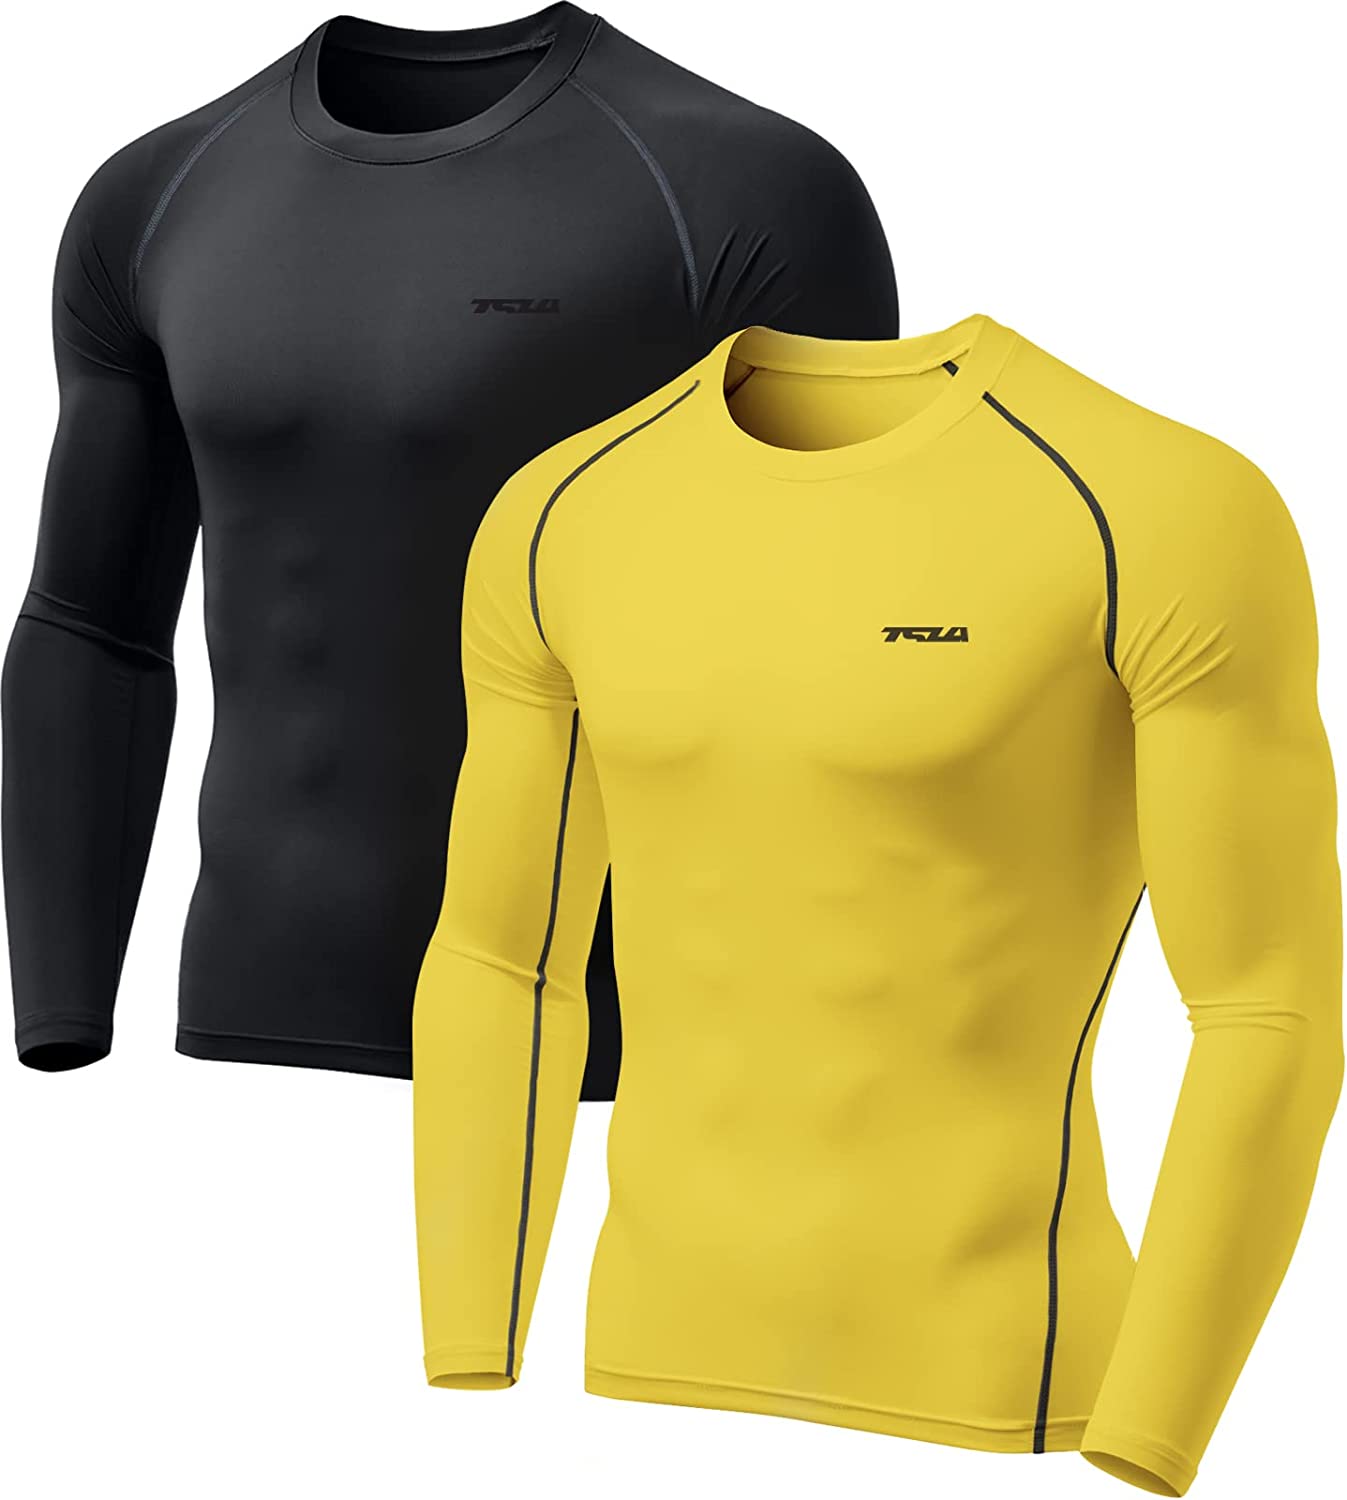 TSLA 1 or 2 Pack Men's Thermal Long Sleeve Compression Shirts Winter Gear Running T-Shirt Athletic Base Layer Top 